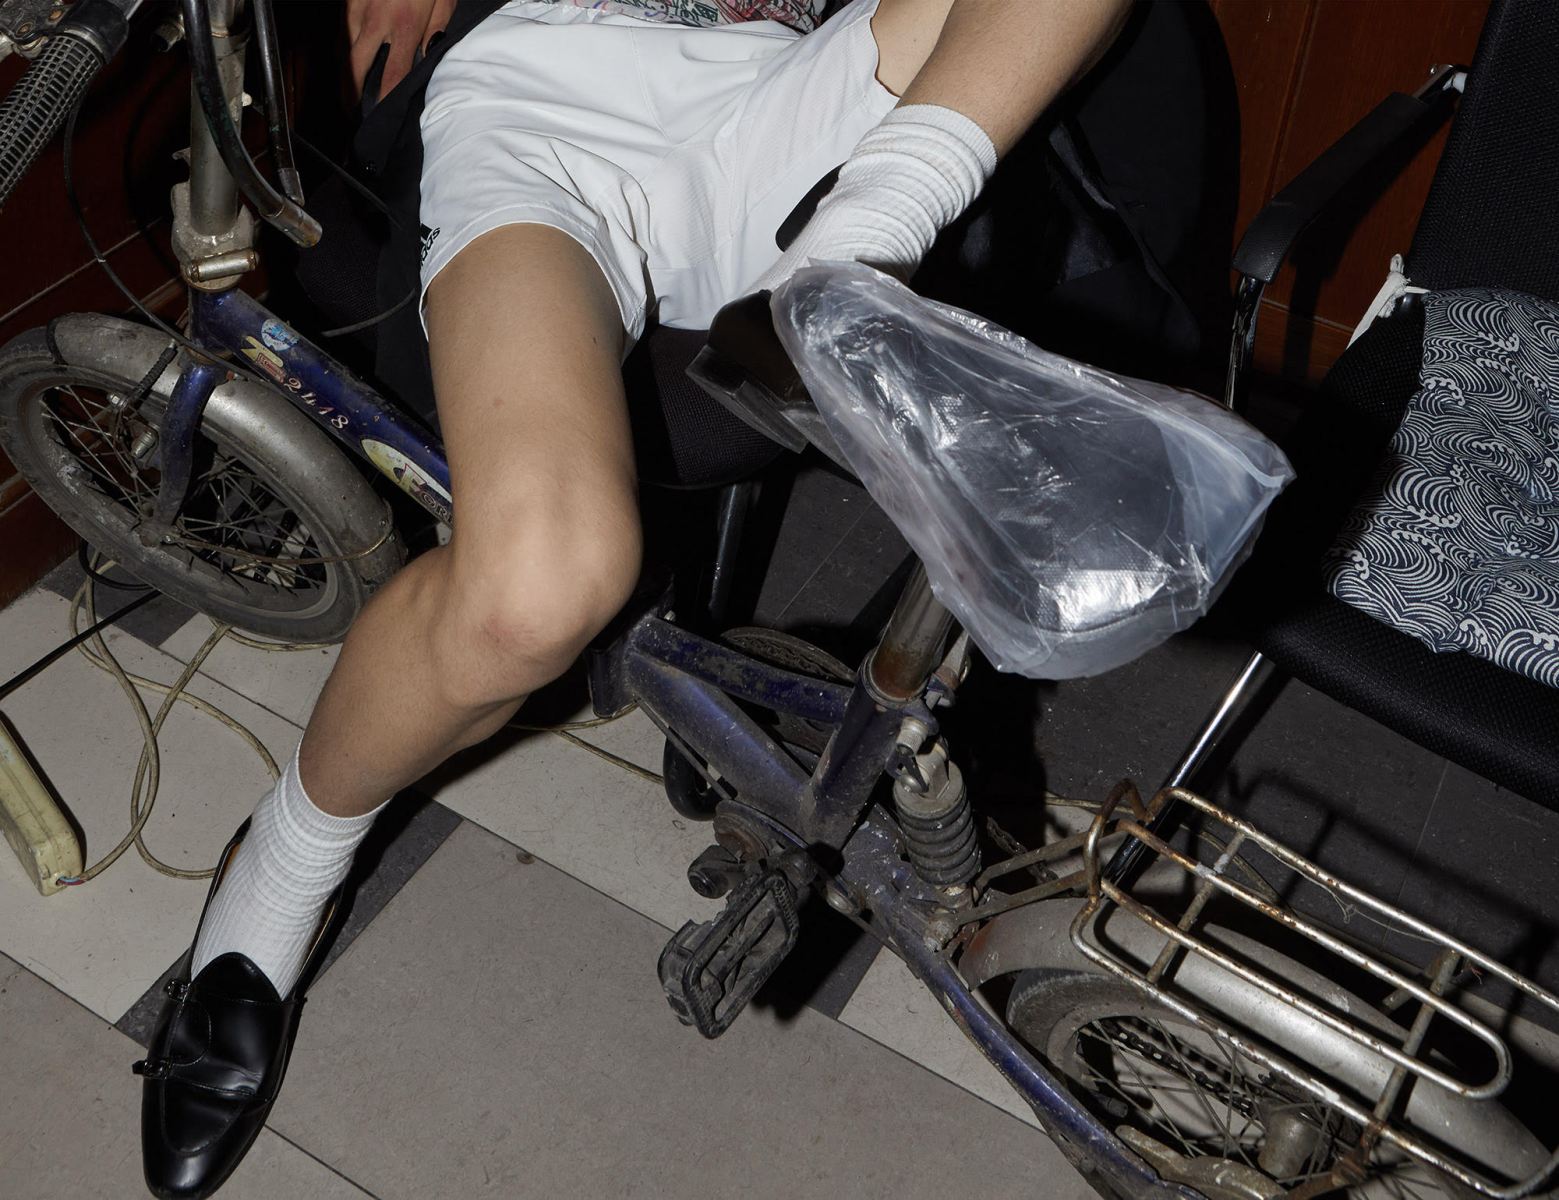 A tightly cropped photograph shows the legs of a figure sitting awkwardly over a bike, the seat is wrapped in a prominent plastic bag